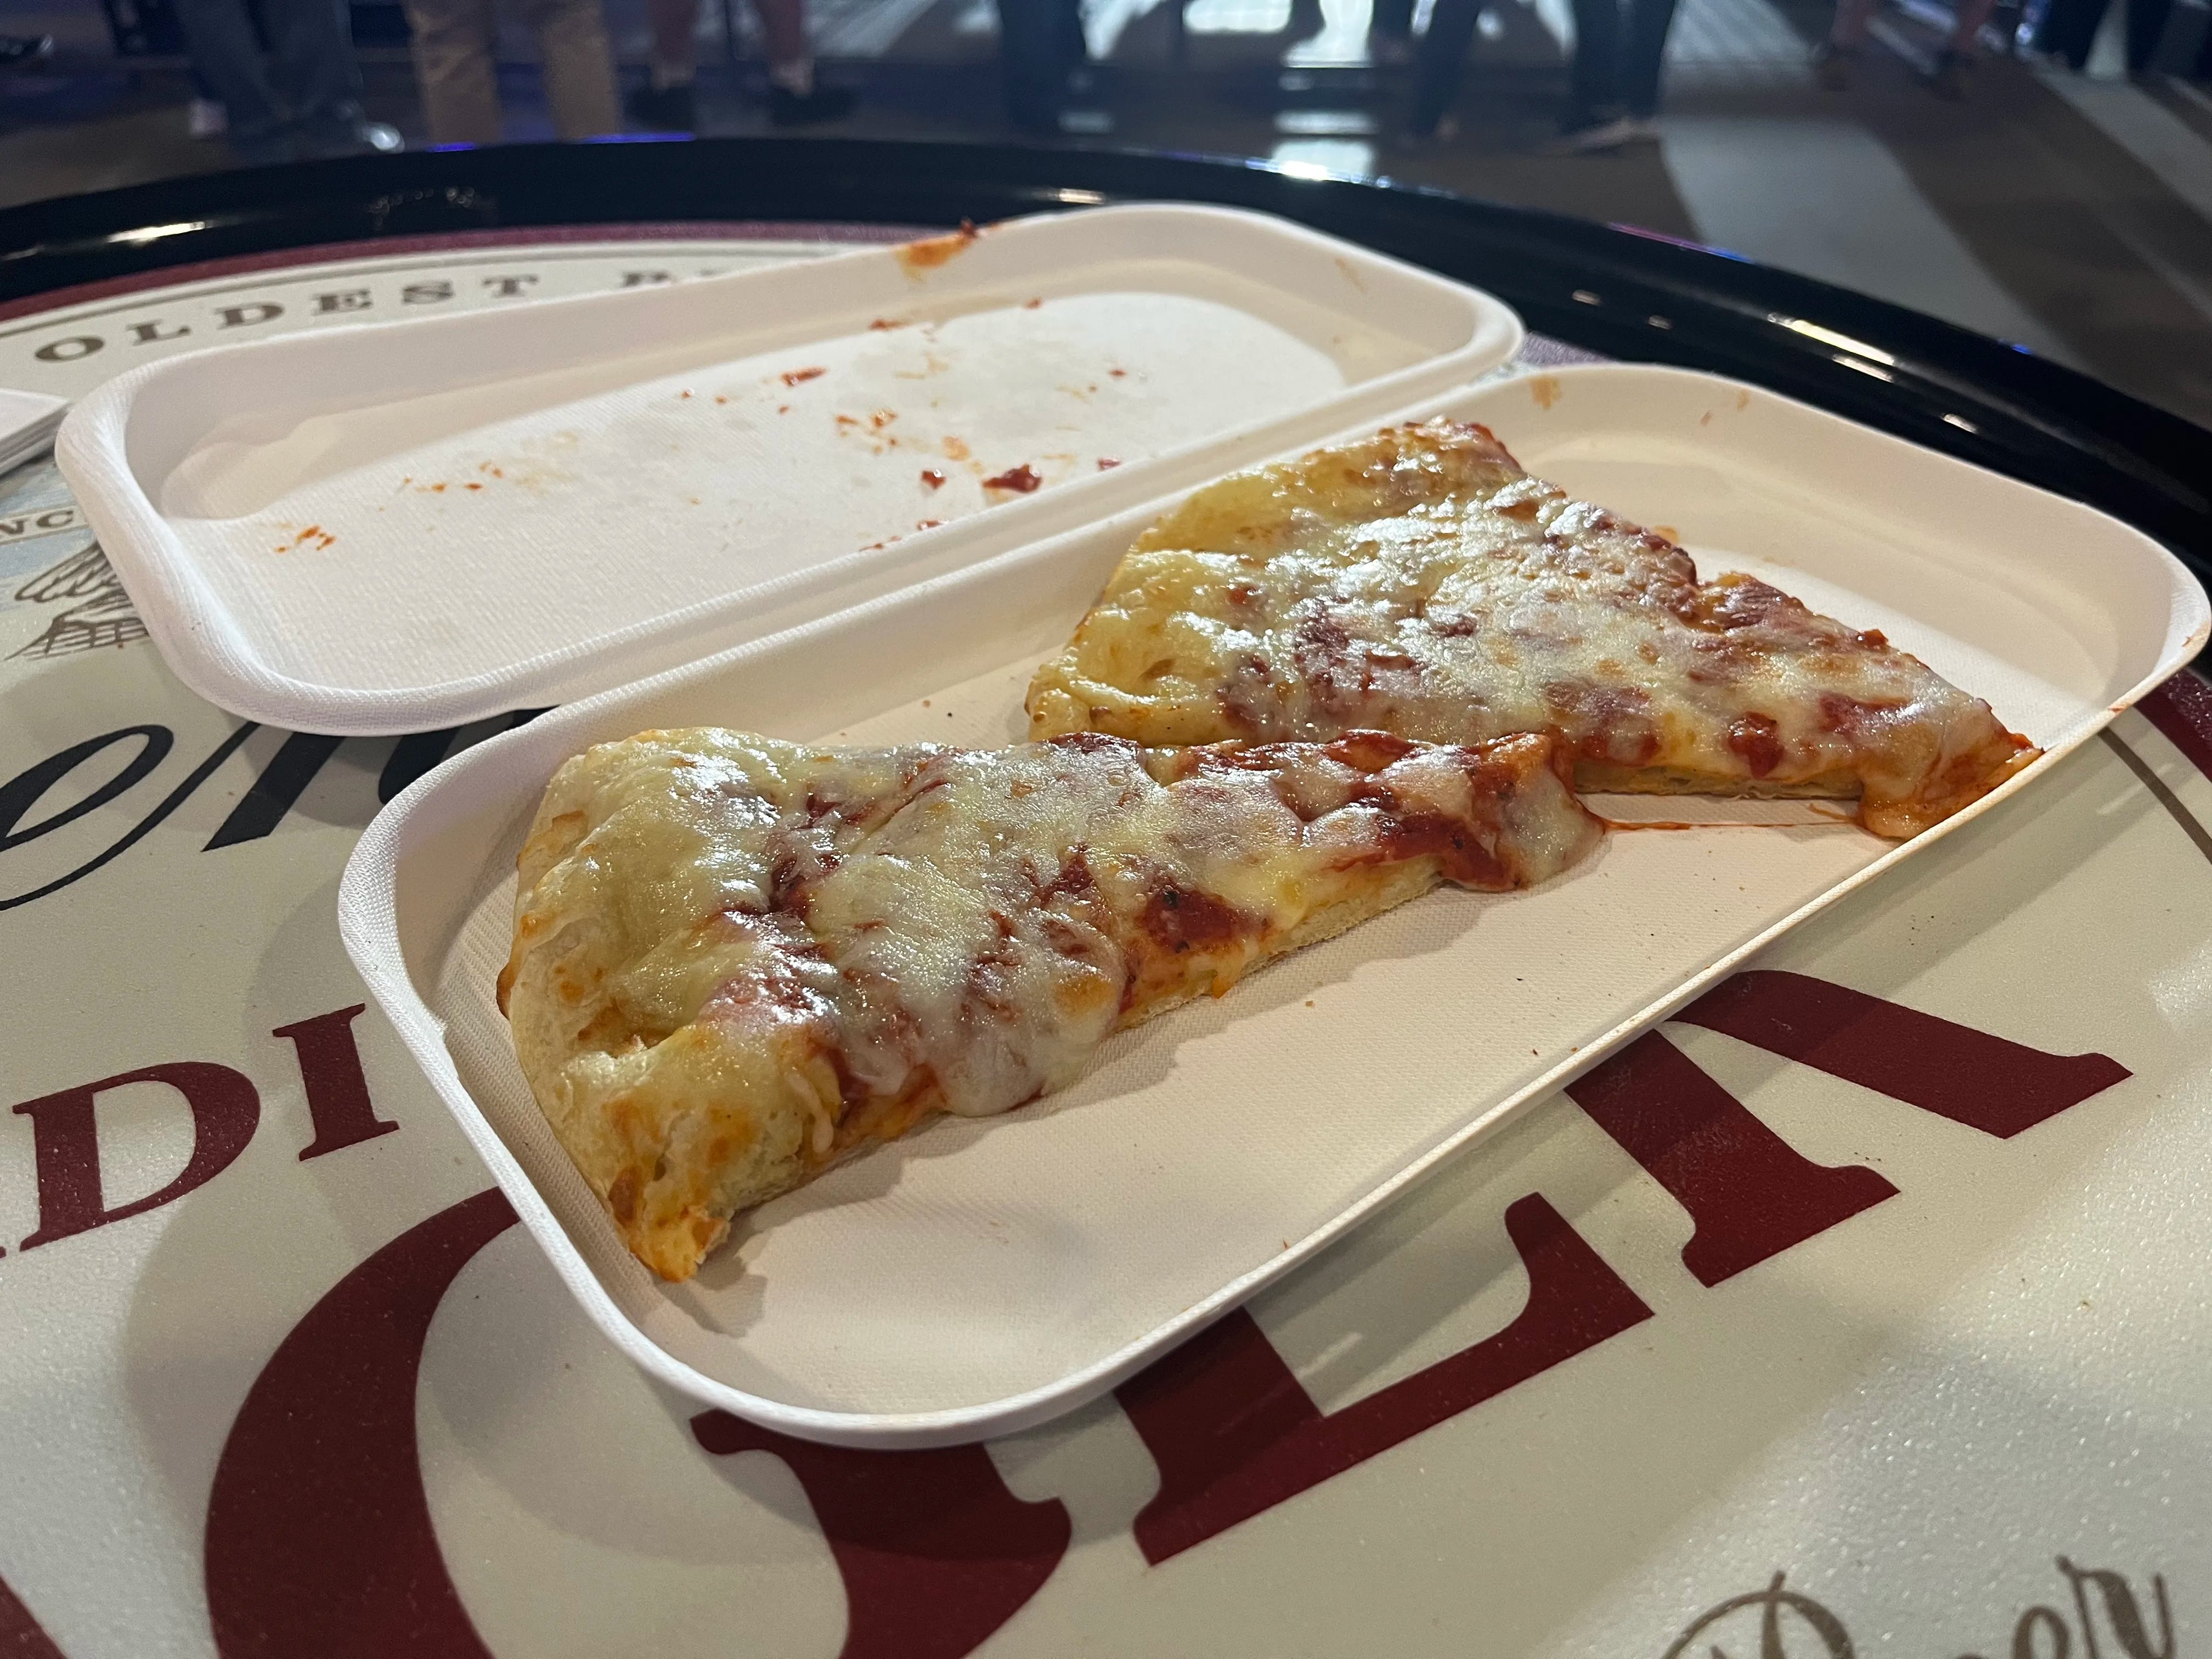 Slice of cheese pizza from Shibe Park Eatery concession stand at Citizen's Bank Park.